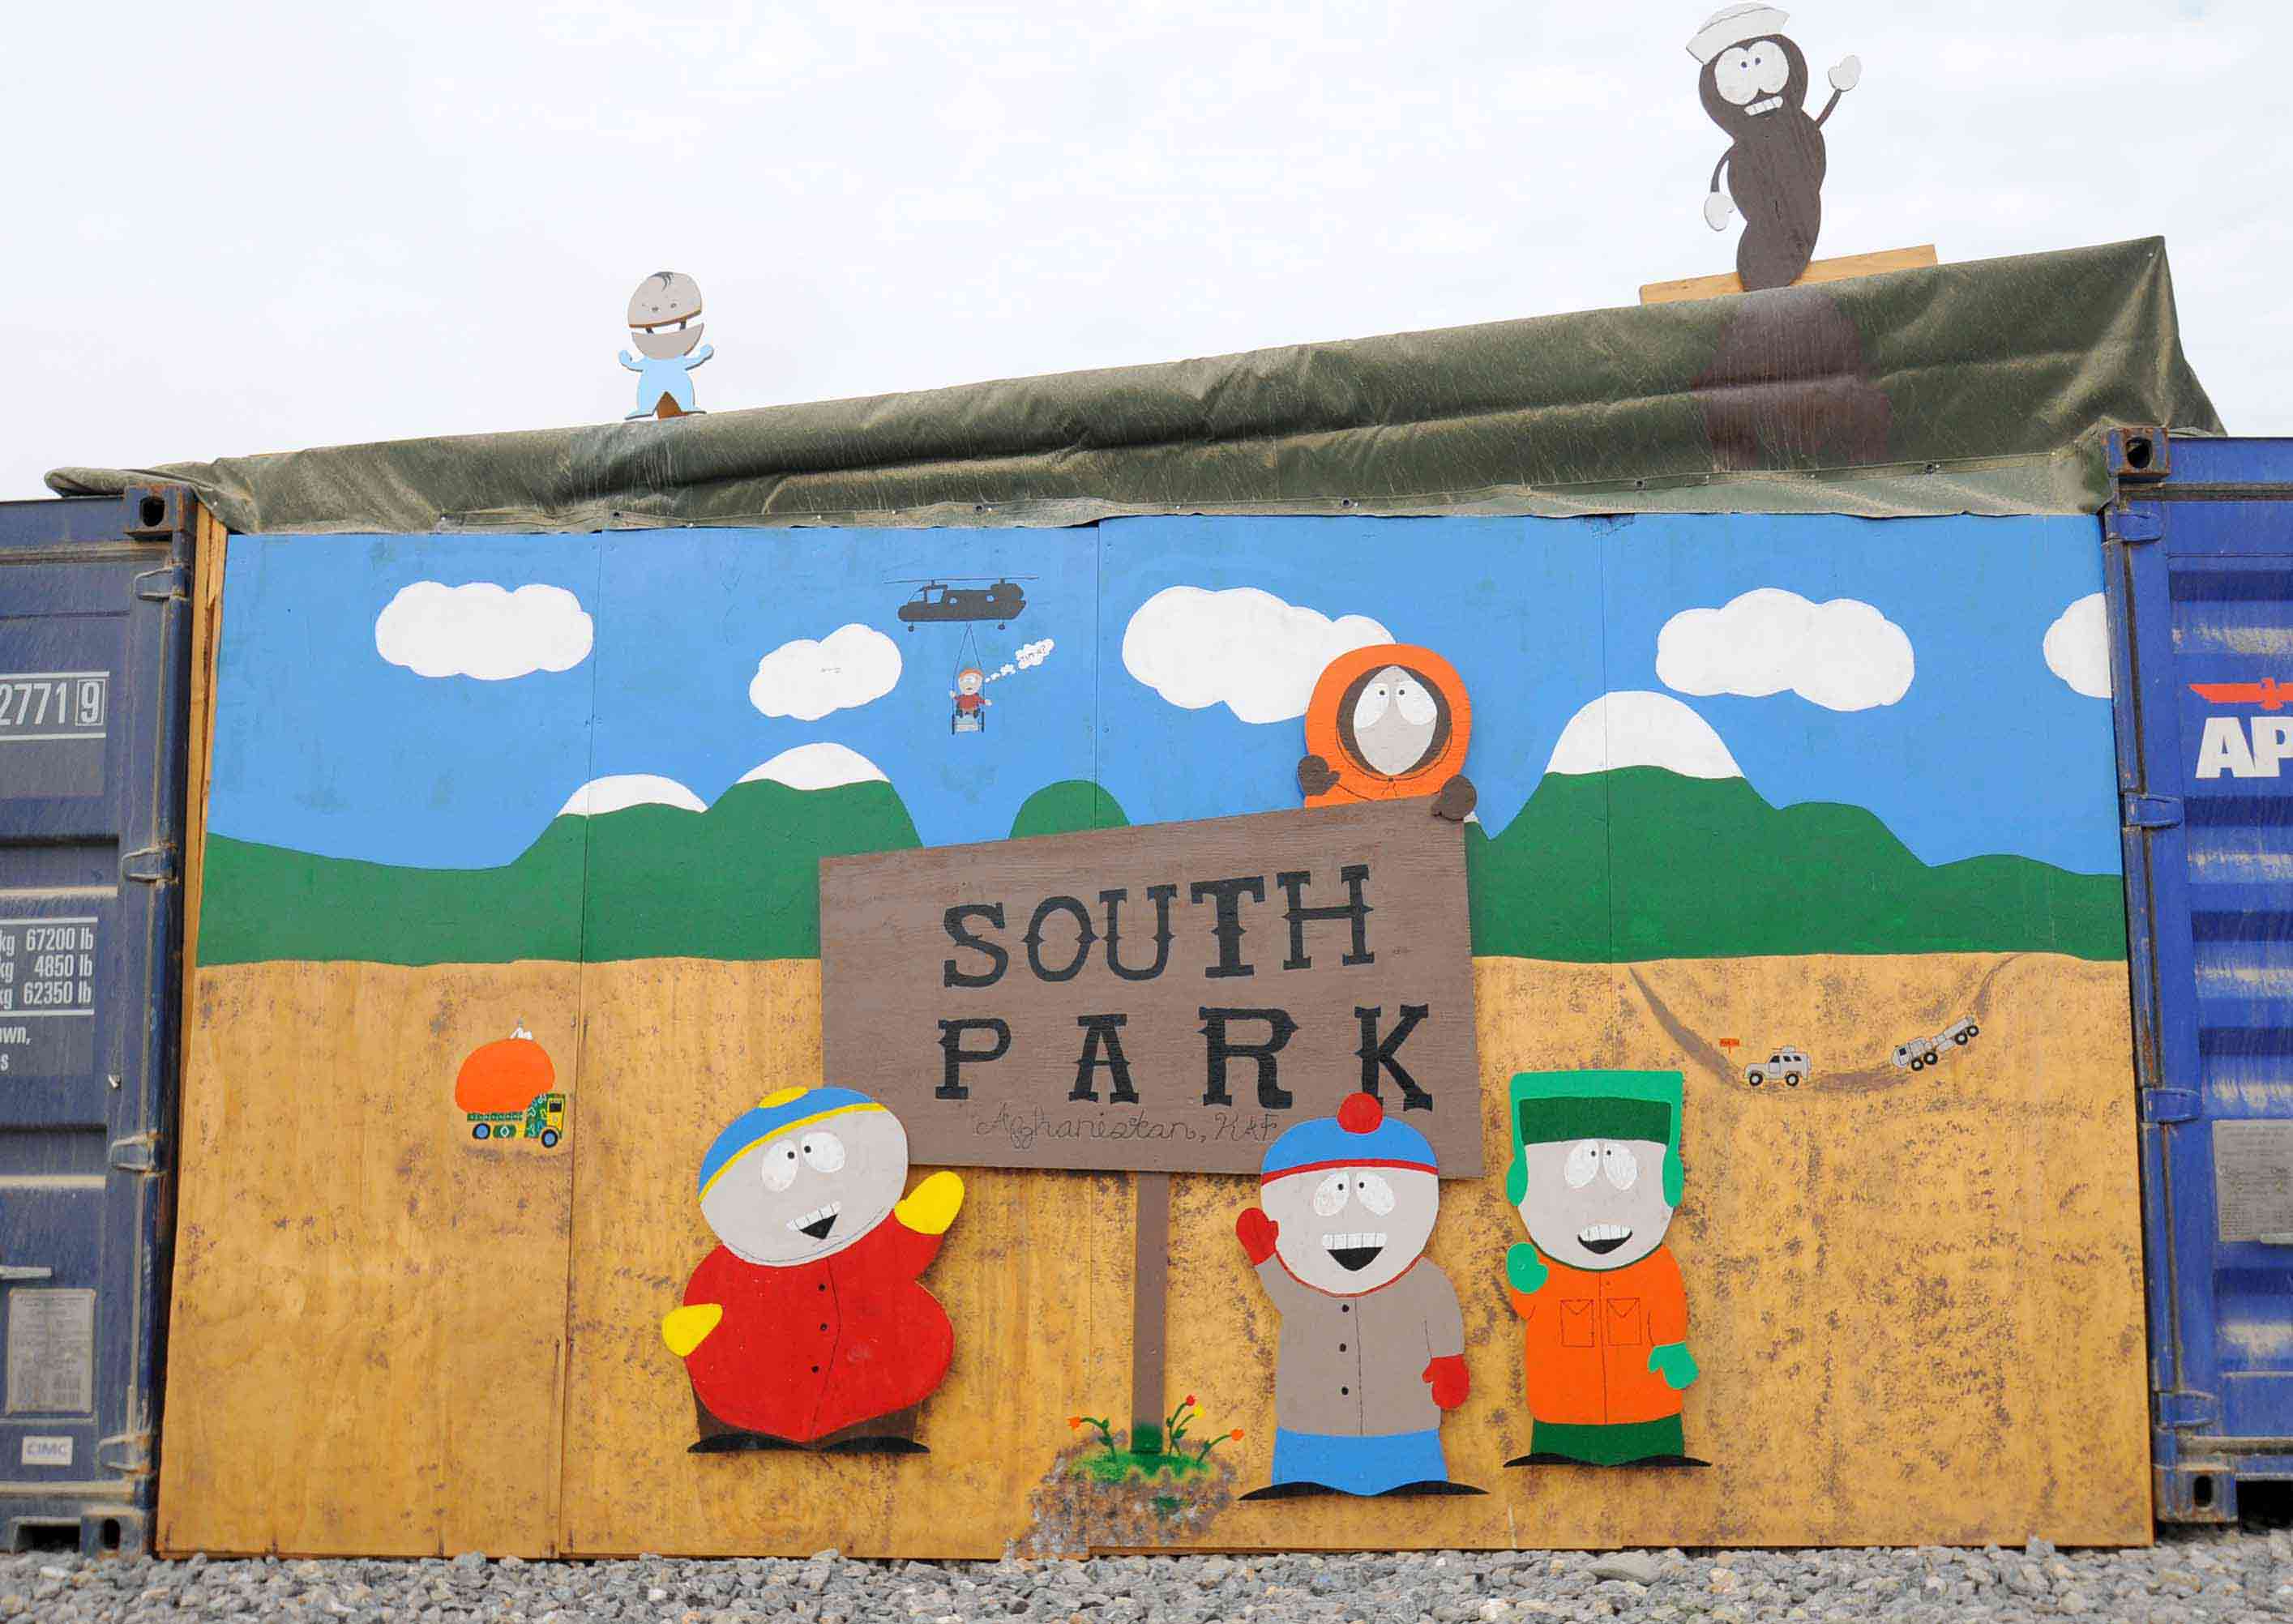 On street 8718-Welcome-to-South-Park